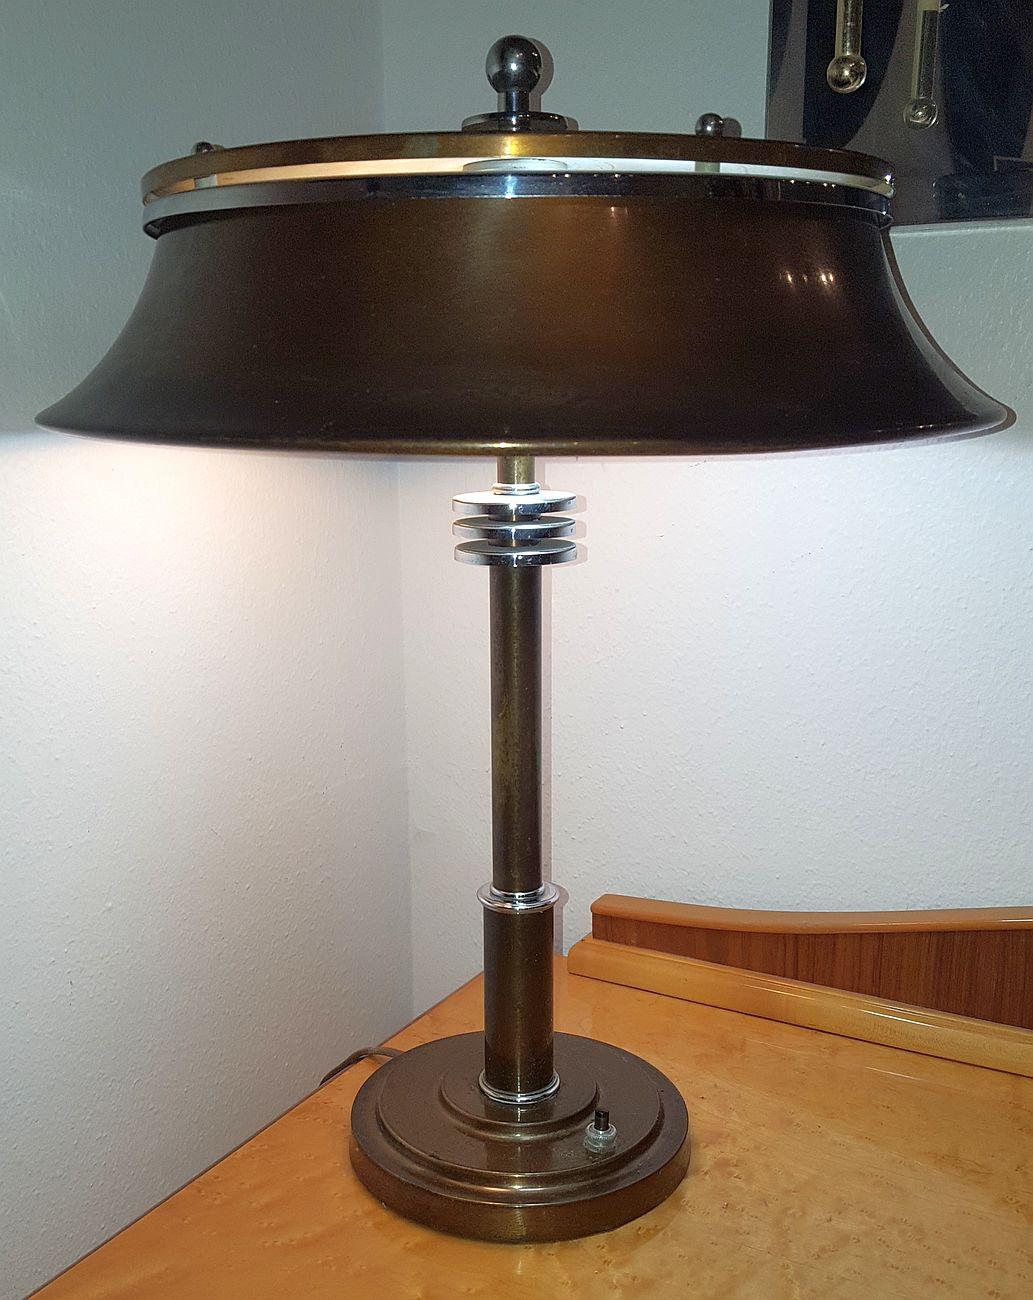 His is an original American Art Deco Machine Age table lamp that was designed and produced in the 1930's by the Markel Company of Buffalo, New York.
 
The three “speed” rings on the shaft are echoed in the typical Markel finial.
 
The lamp is